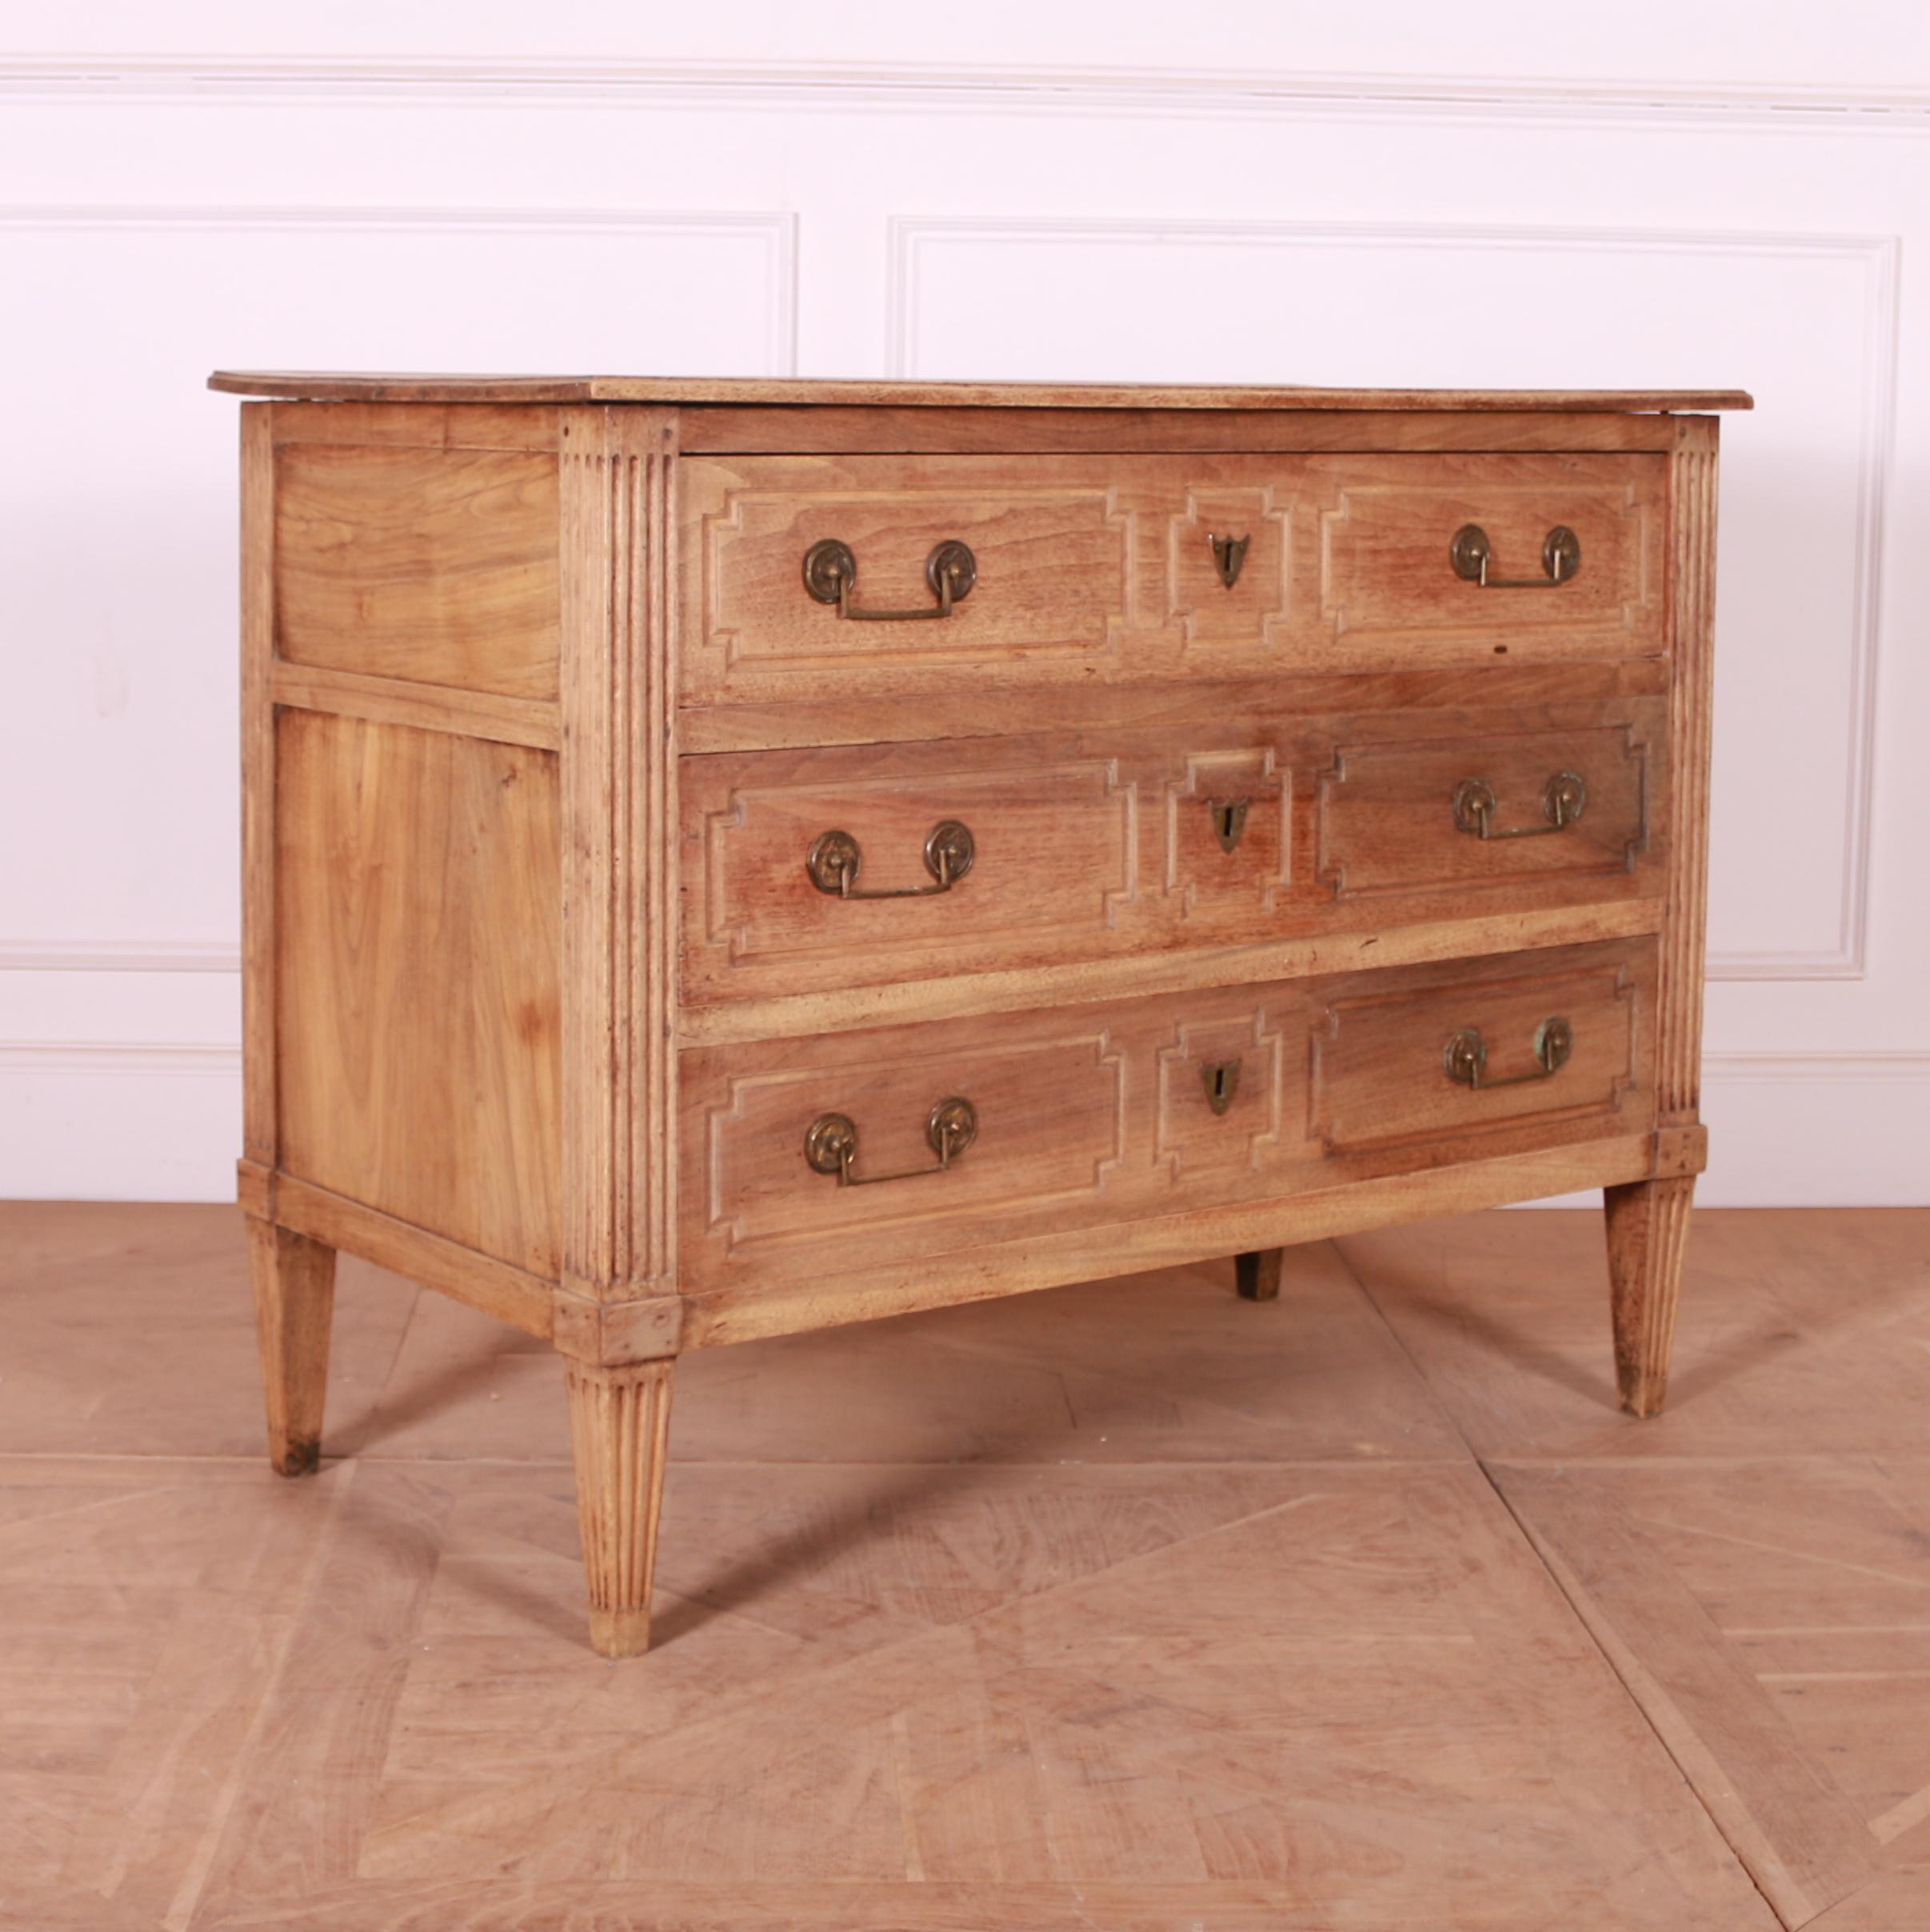 19th C French bleached walnut 3 drawer commode in a Neo-classical style. 1840.

Reference: 7706

Dimensions
45 inches (114 cms) Wide
22.5 inches (57 cms) Deep
34.5 inches (88 cms) High.